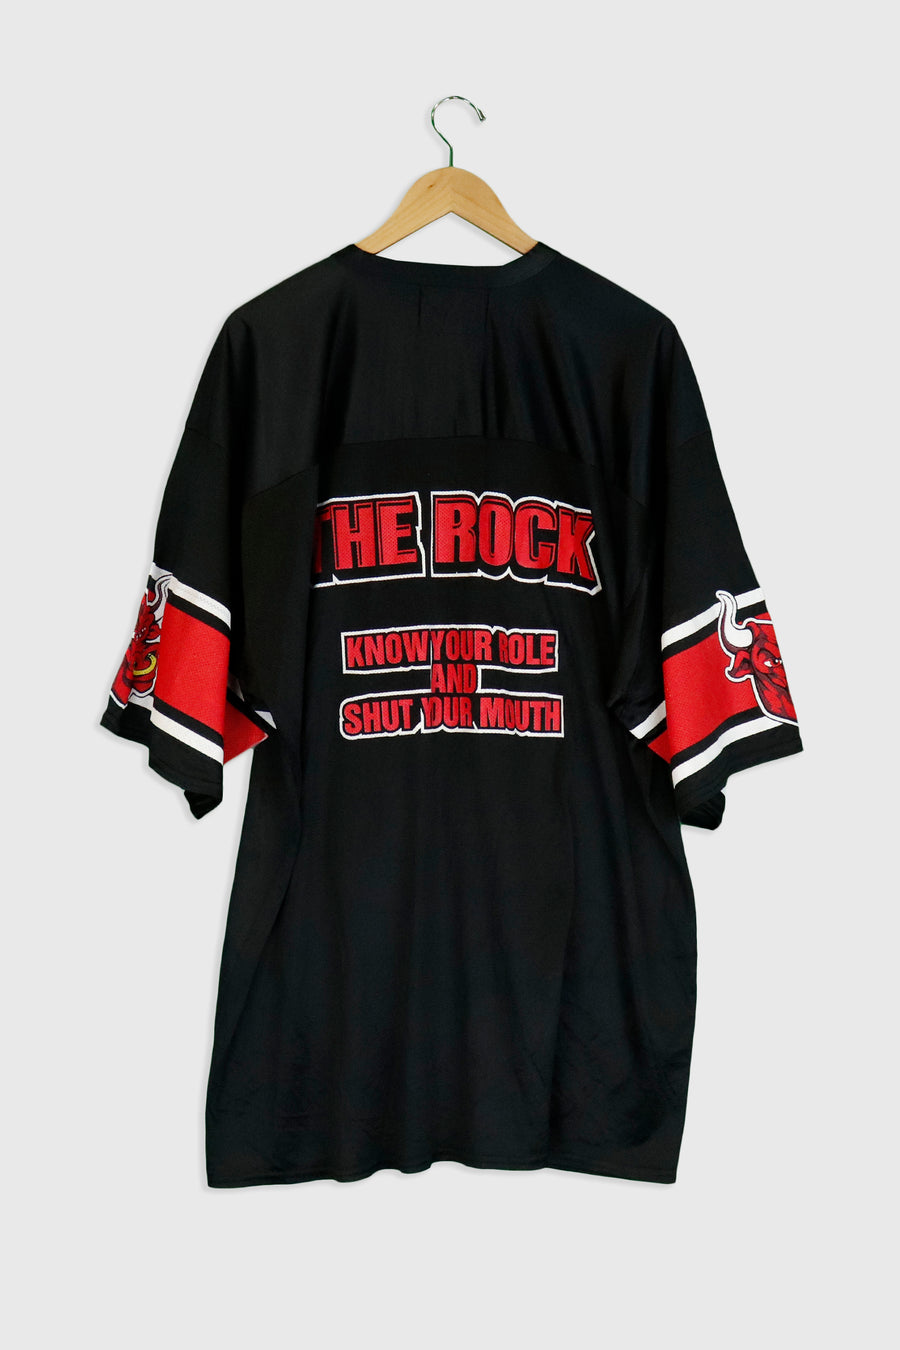 Vintage 2000 WWF The Rock 'Know Your Roll And Shut Your Mouth' Jersey Sz 2XL